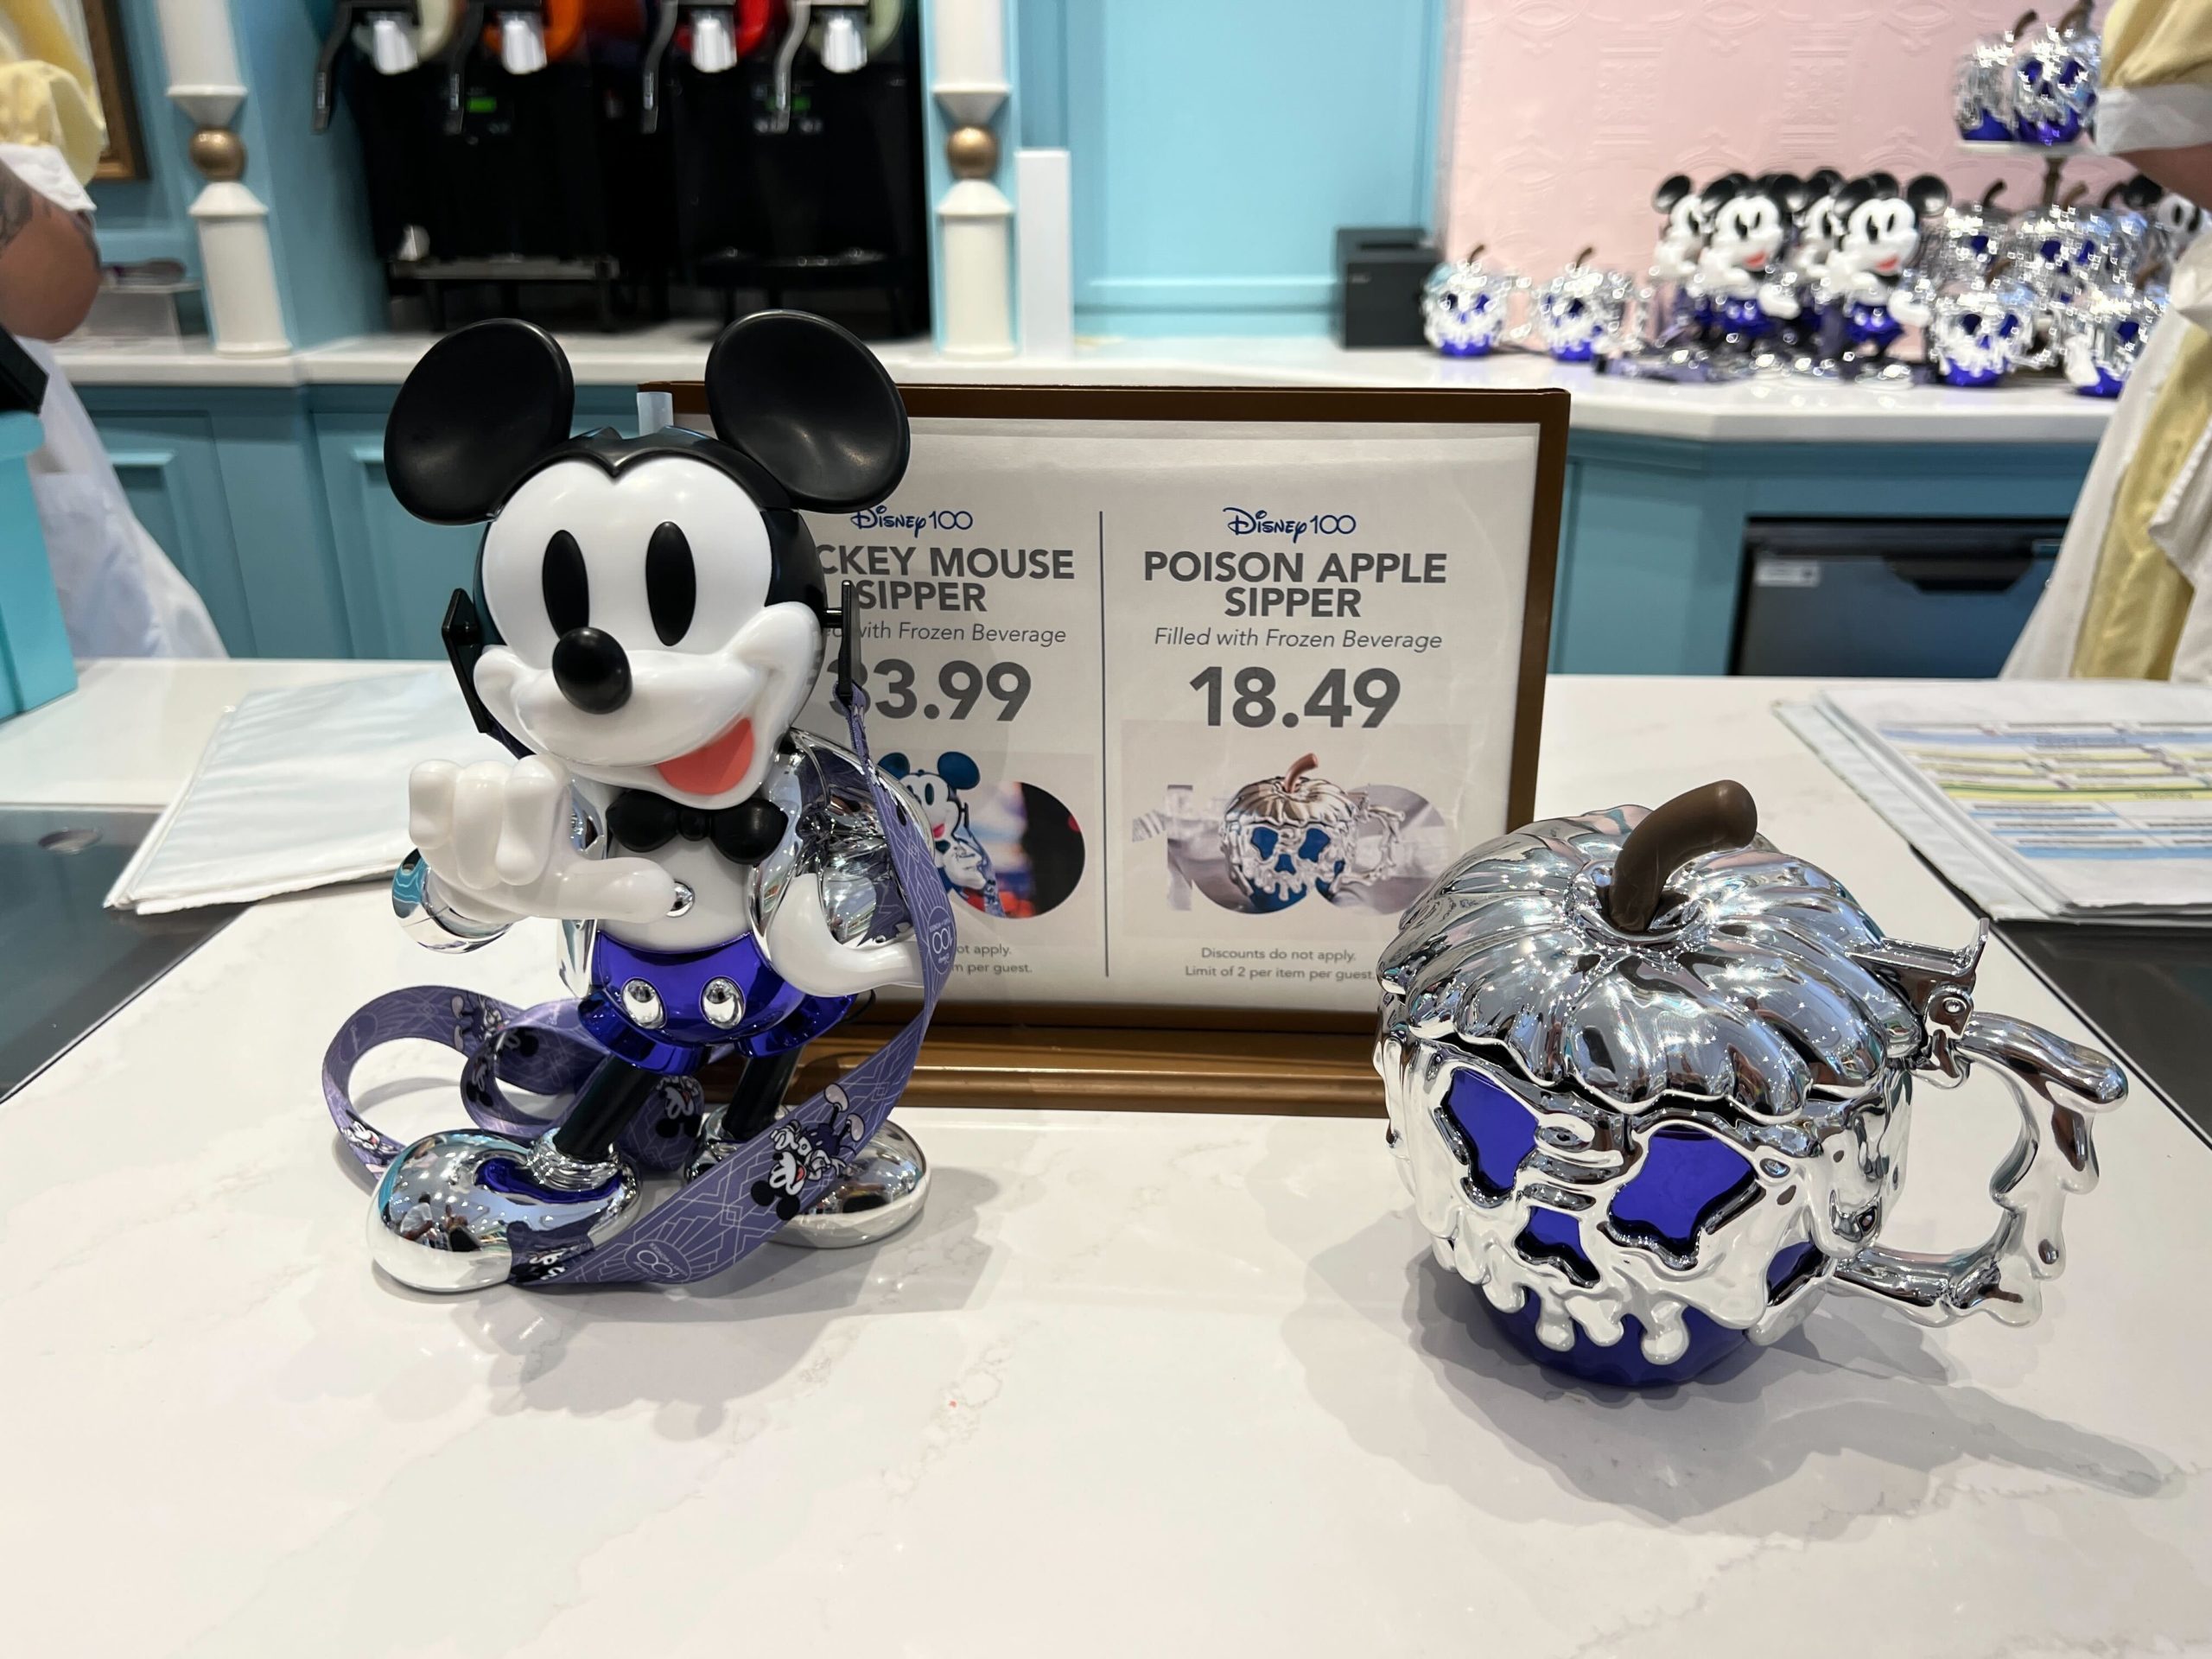 FIRST LOOK Disney100 Mickey Mouse Sipper and Poison Apple Sipper